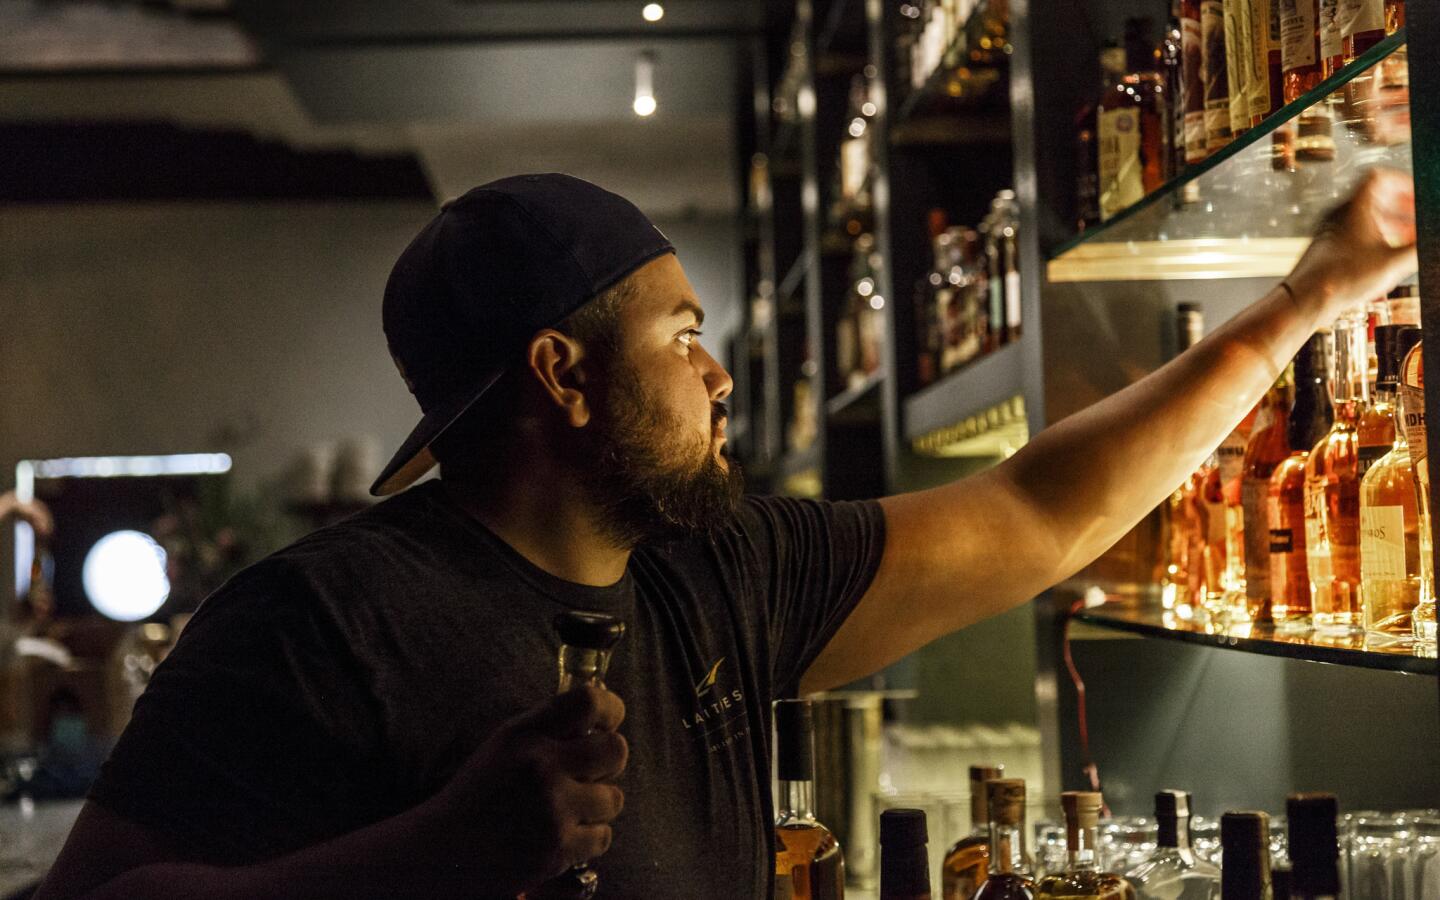 Bar manager Chris Ojeda arranging the shelves at E.R.B., short for Everson Royce Bar, in the downtown Arts District.